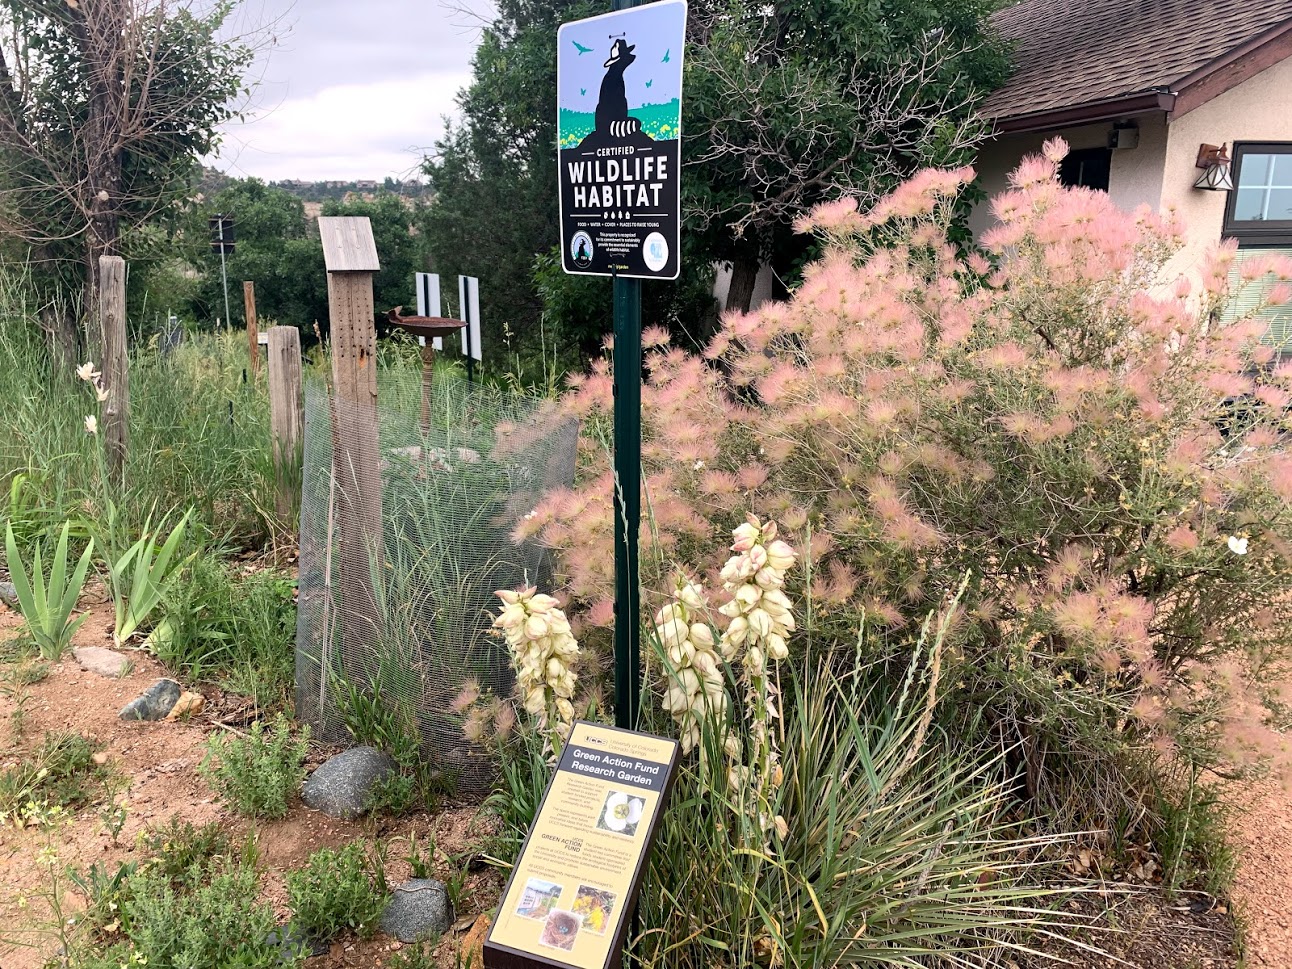 NWF wildlife habitat sign with apache plume bush in the background